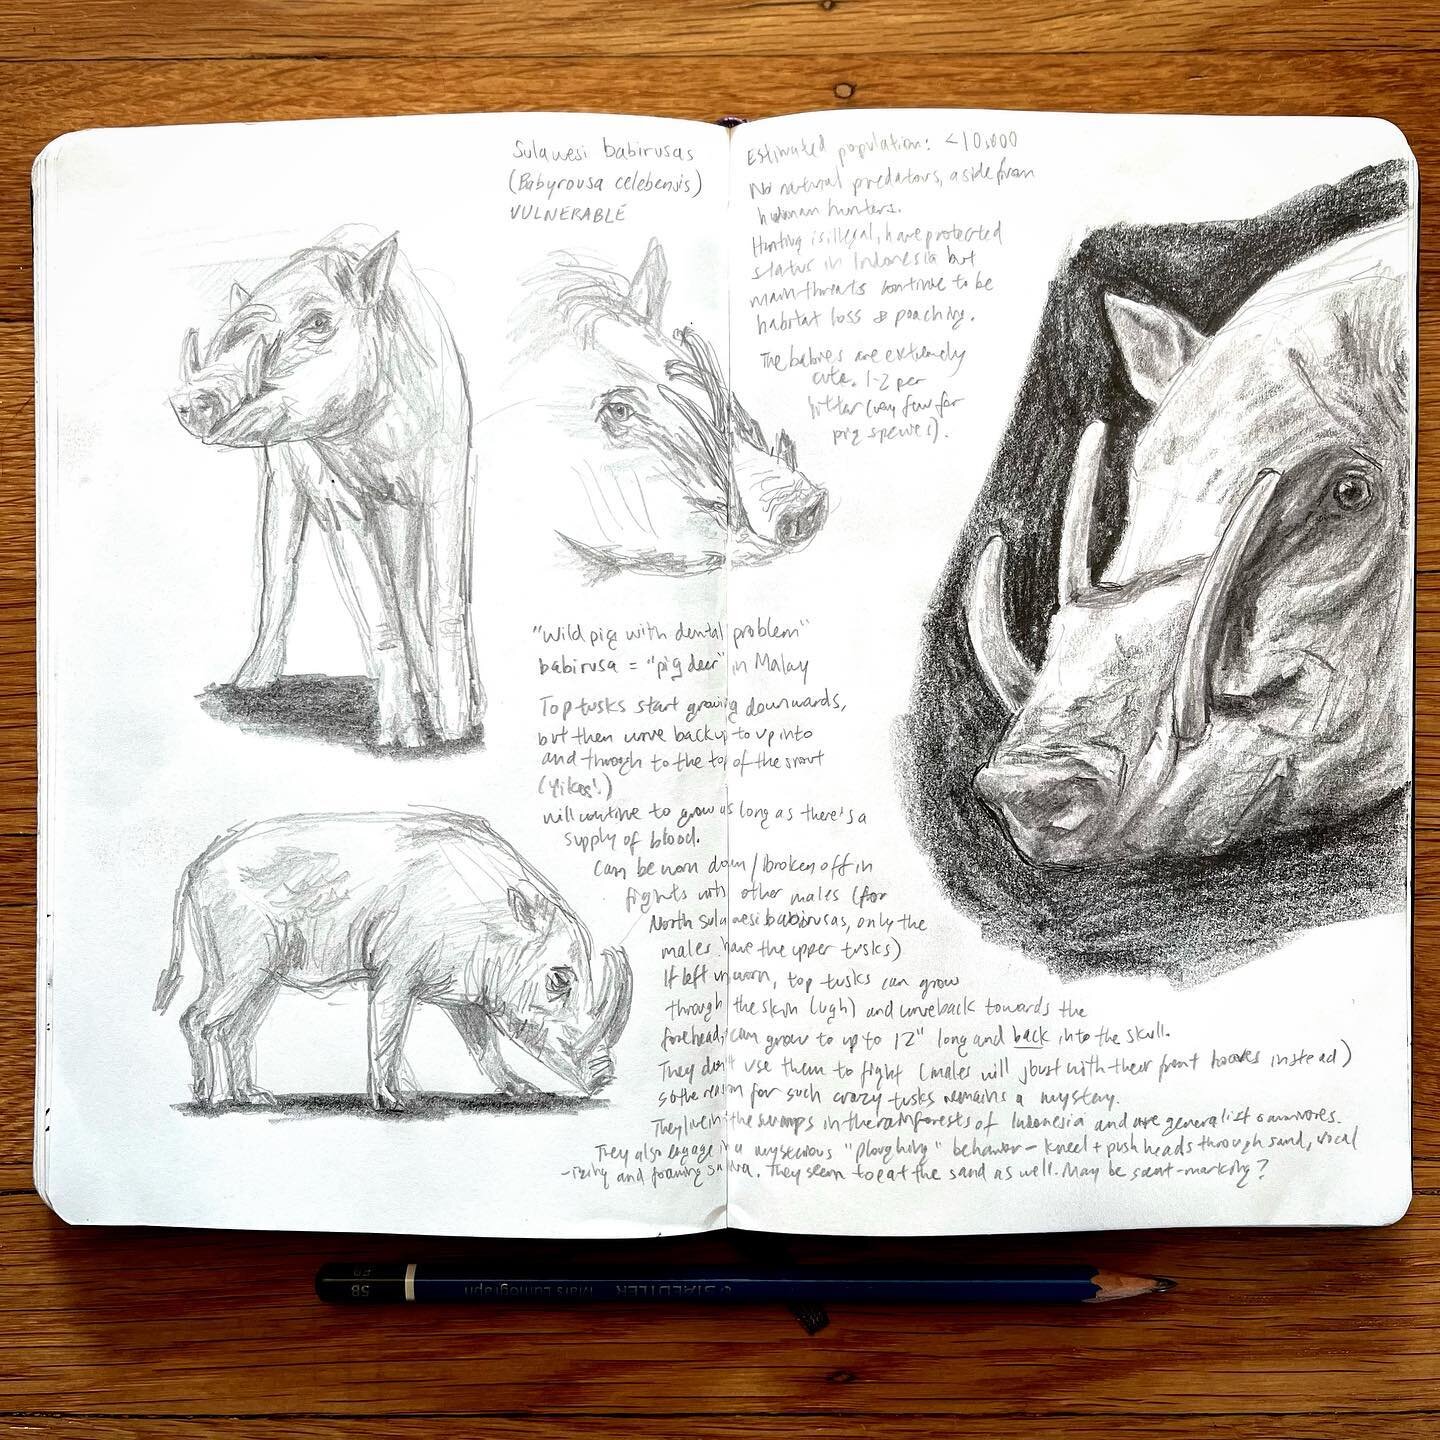 Study sketches of the insanely wild babirusa, inspired by photos from #photoark by @joelsartore 

Sulawesi babirusa (Babyrousa celebensis) - vulnerable

(Note that this species is now considered distinct from others within the Babyrousa genus and is 